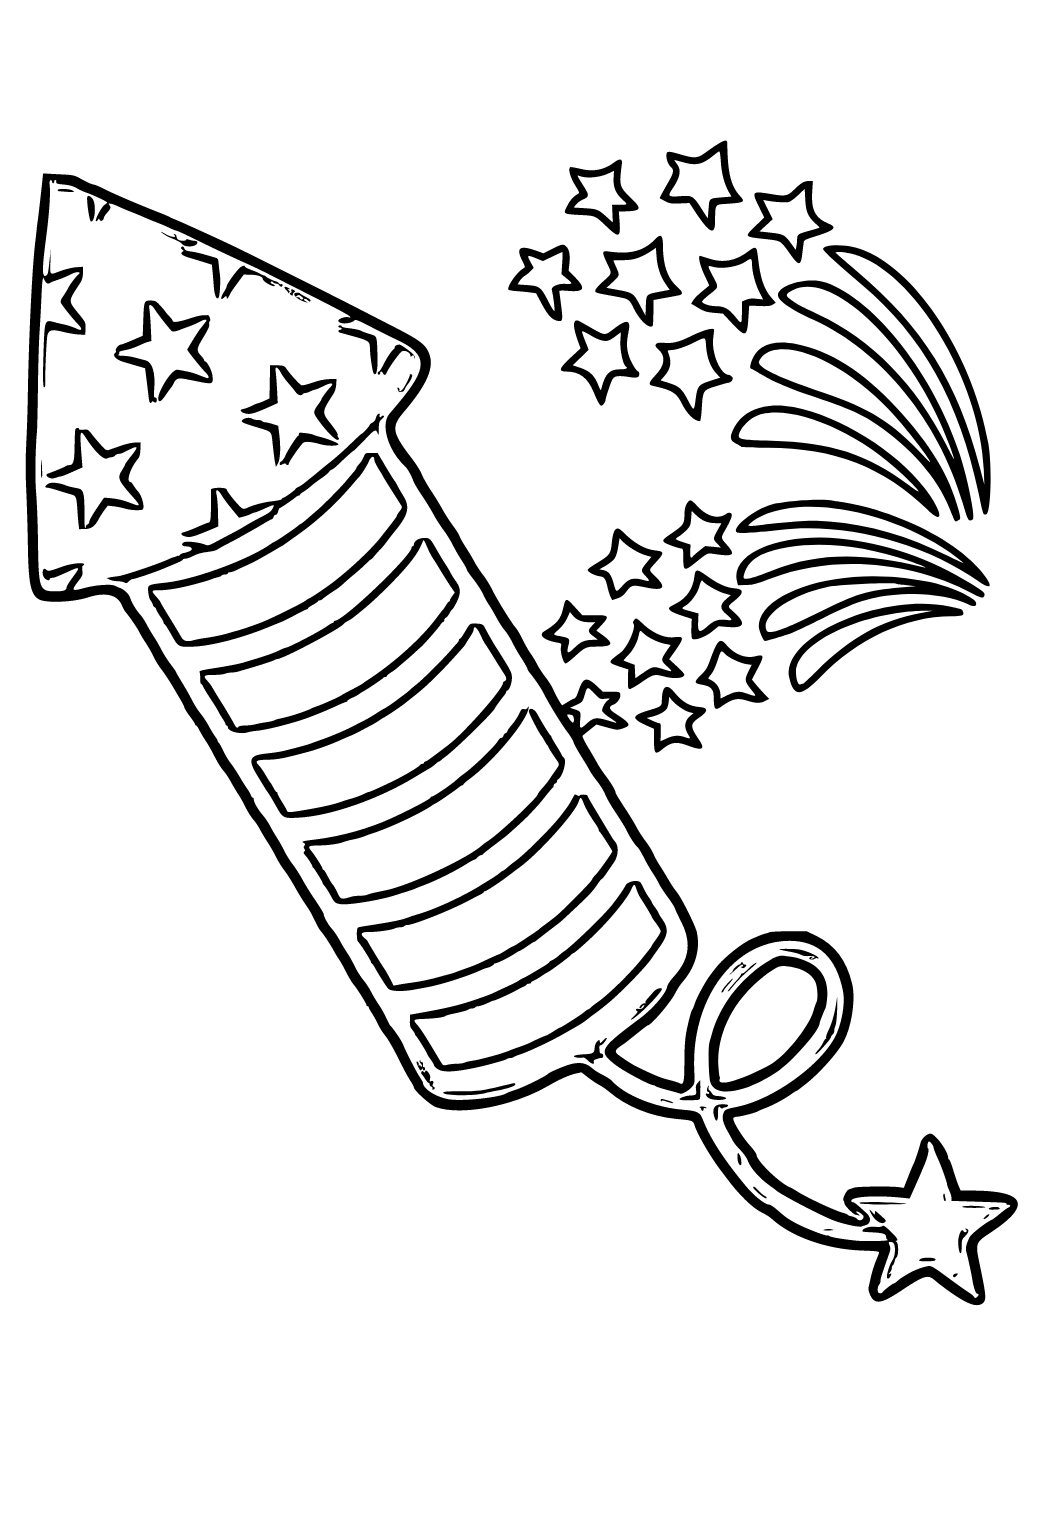 diwali crackers coloring pages